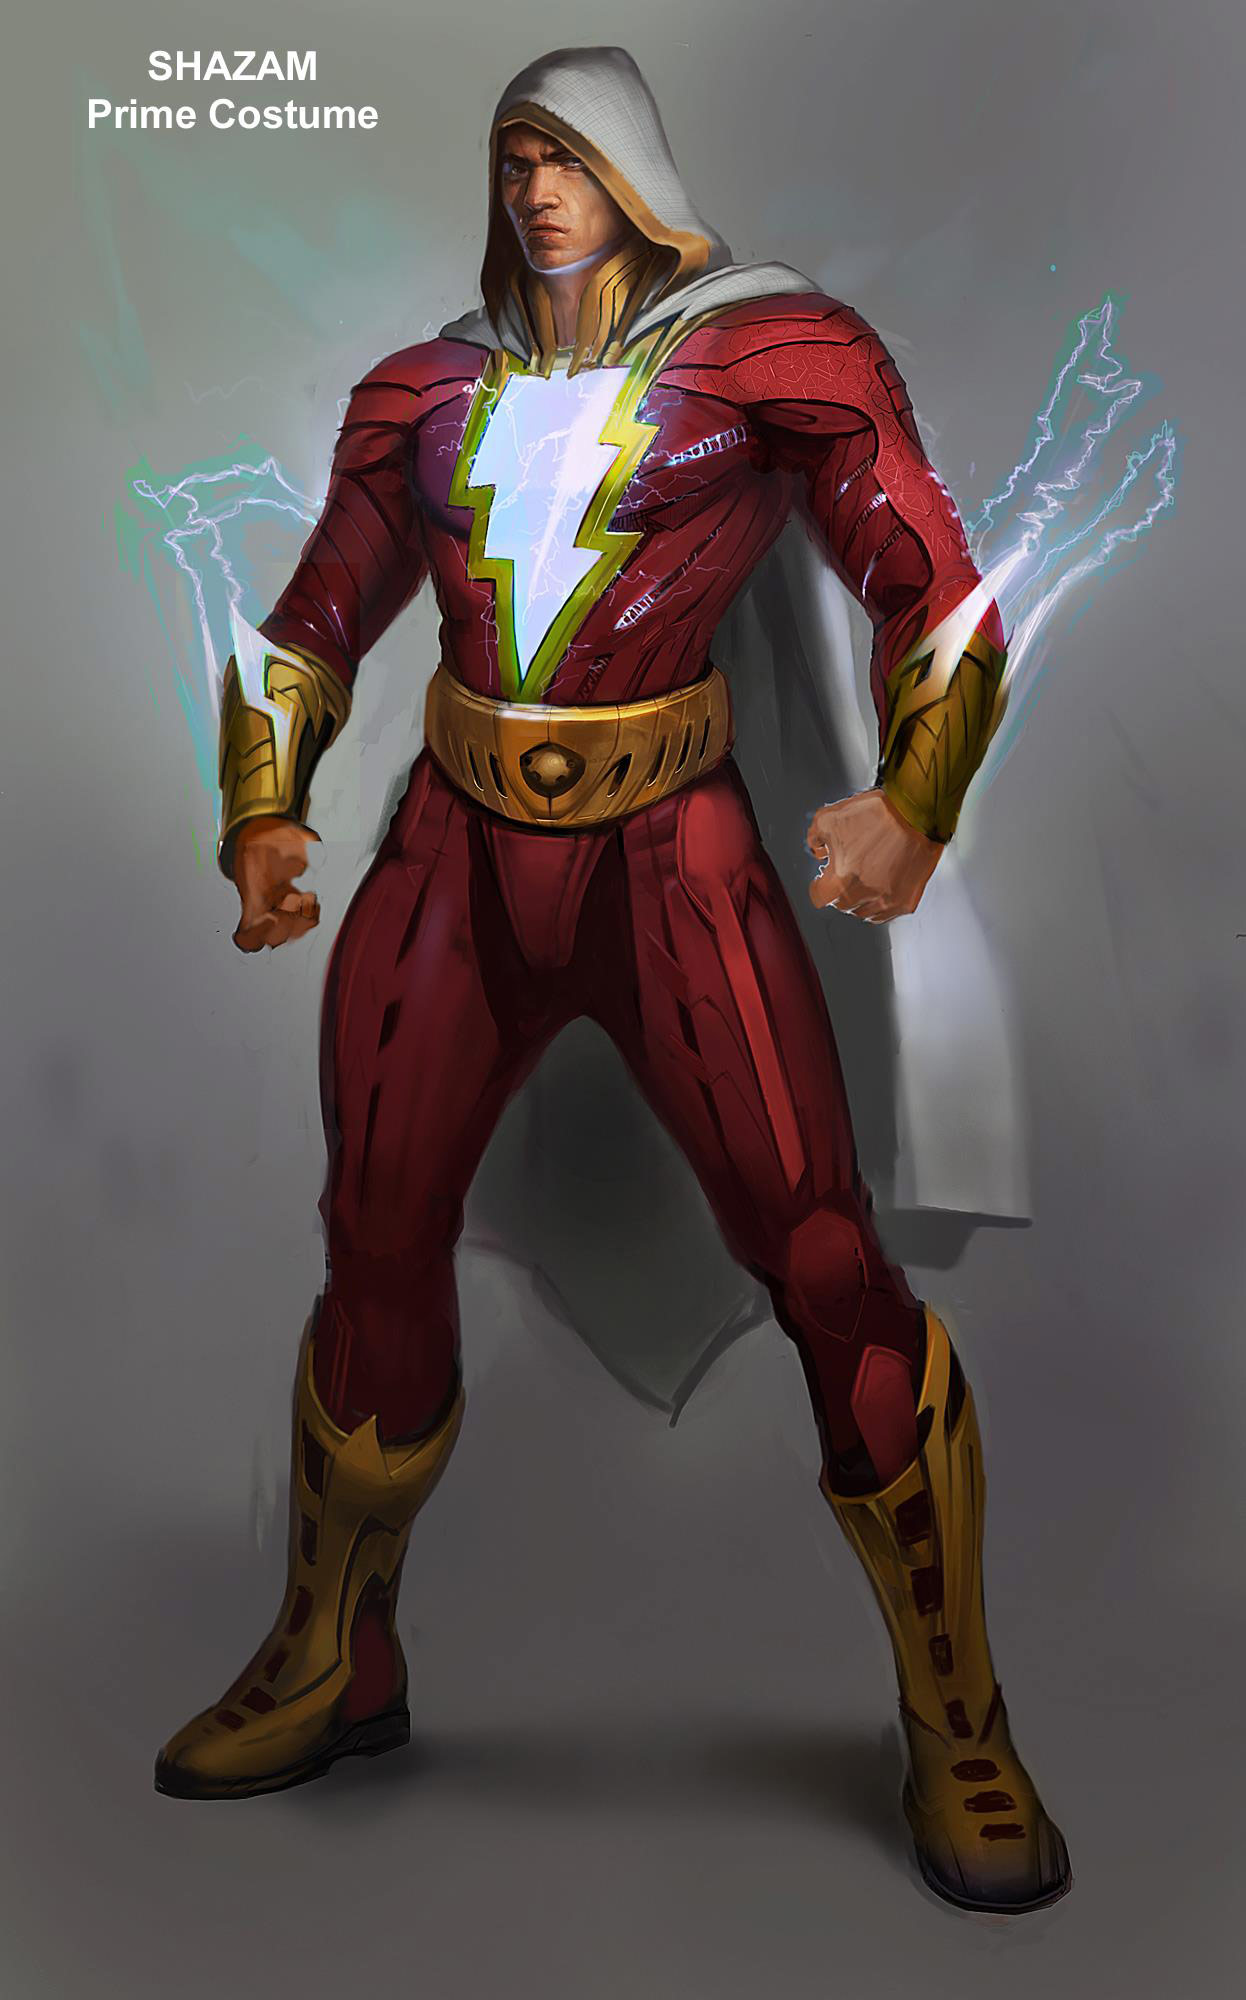 Discussion: Which costume of Shazam can we expect in his upcoming movie